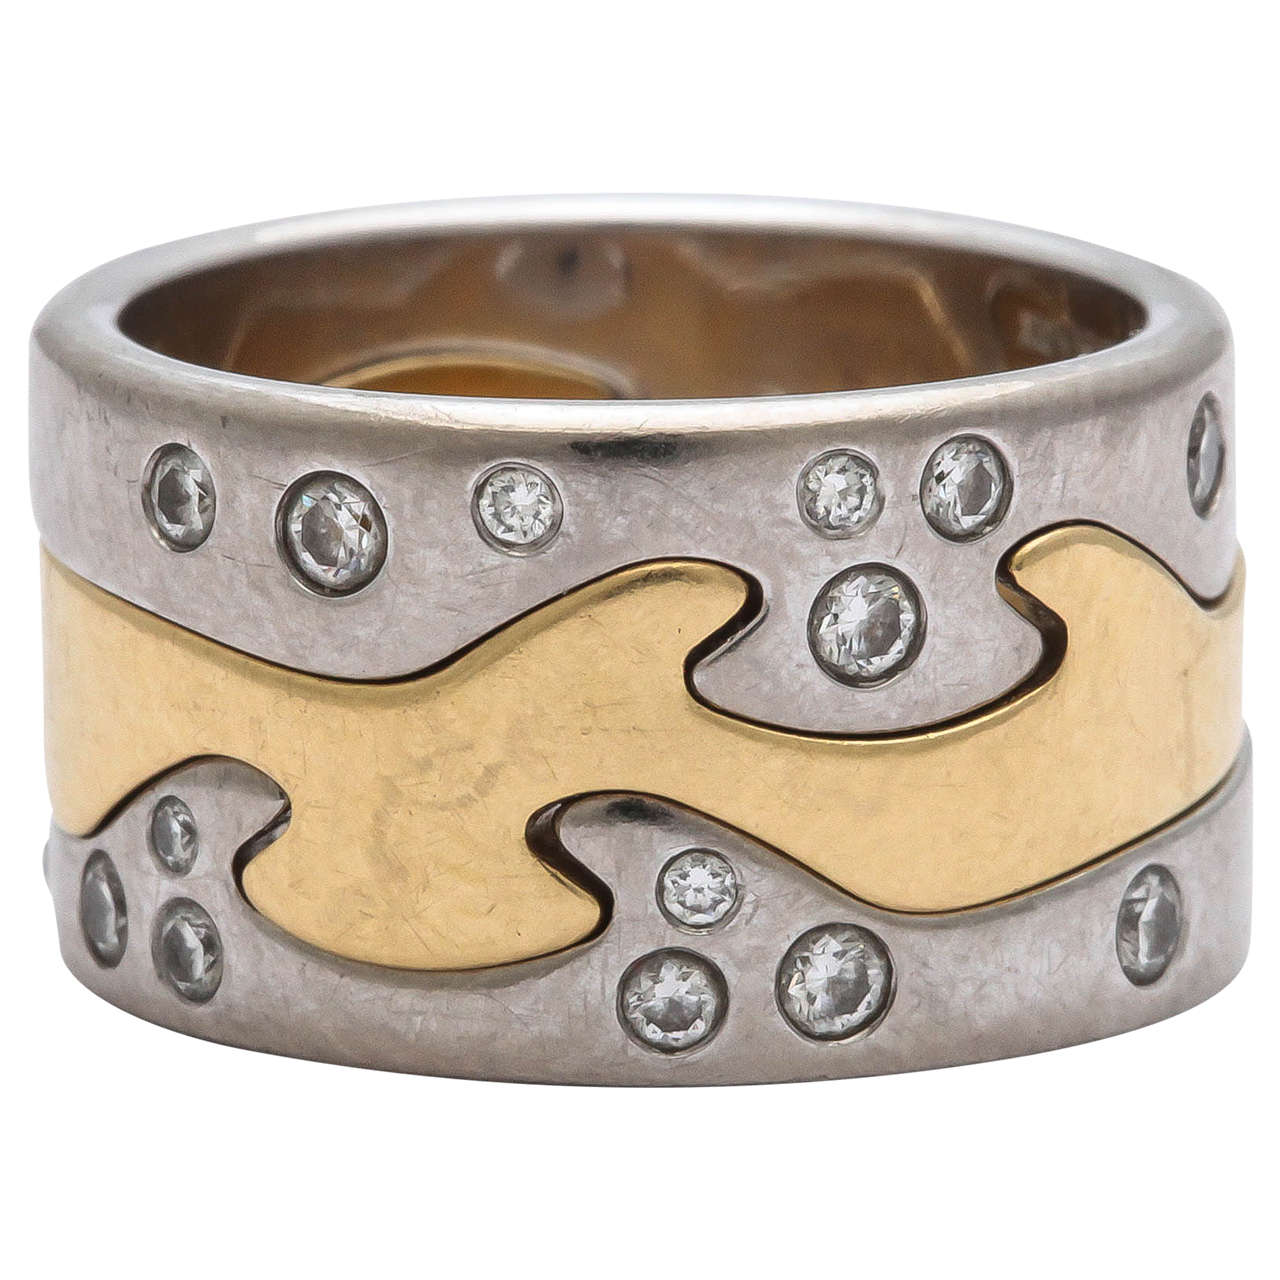 Georg Jensen Fusion Ring - 11 For Sale on 1stDibs | georg jensen fusion  ring auktion, georg jensen fusion ring second hand, georg jensen fusion  rings uk